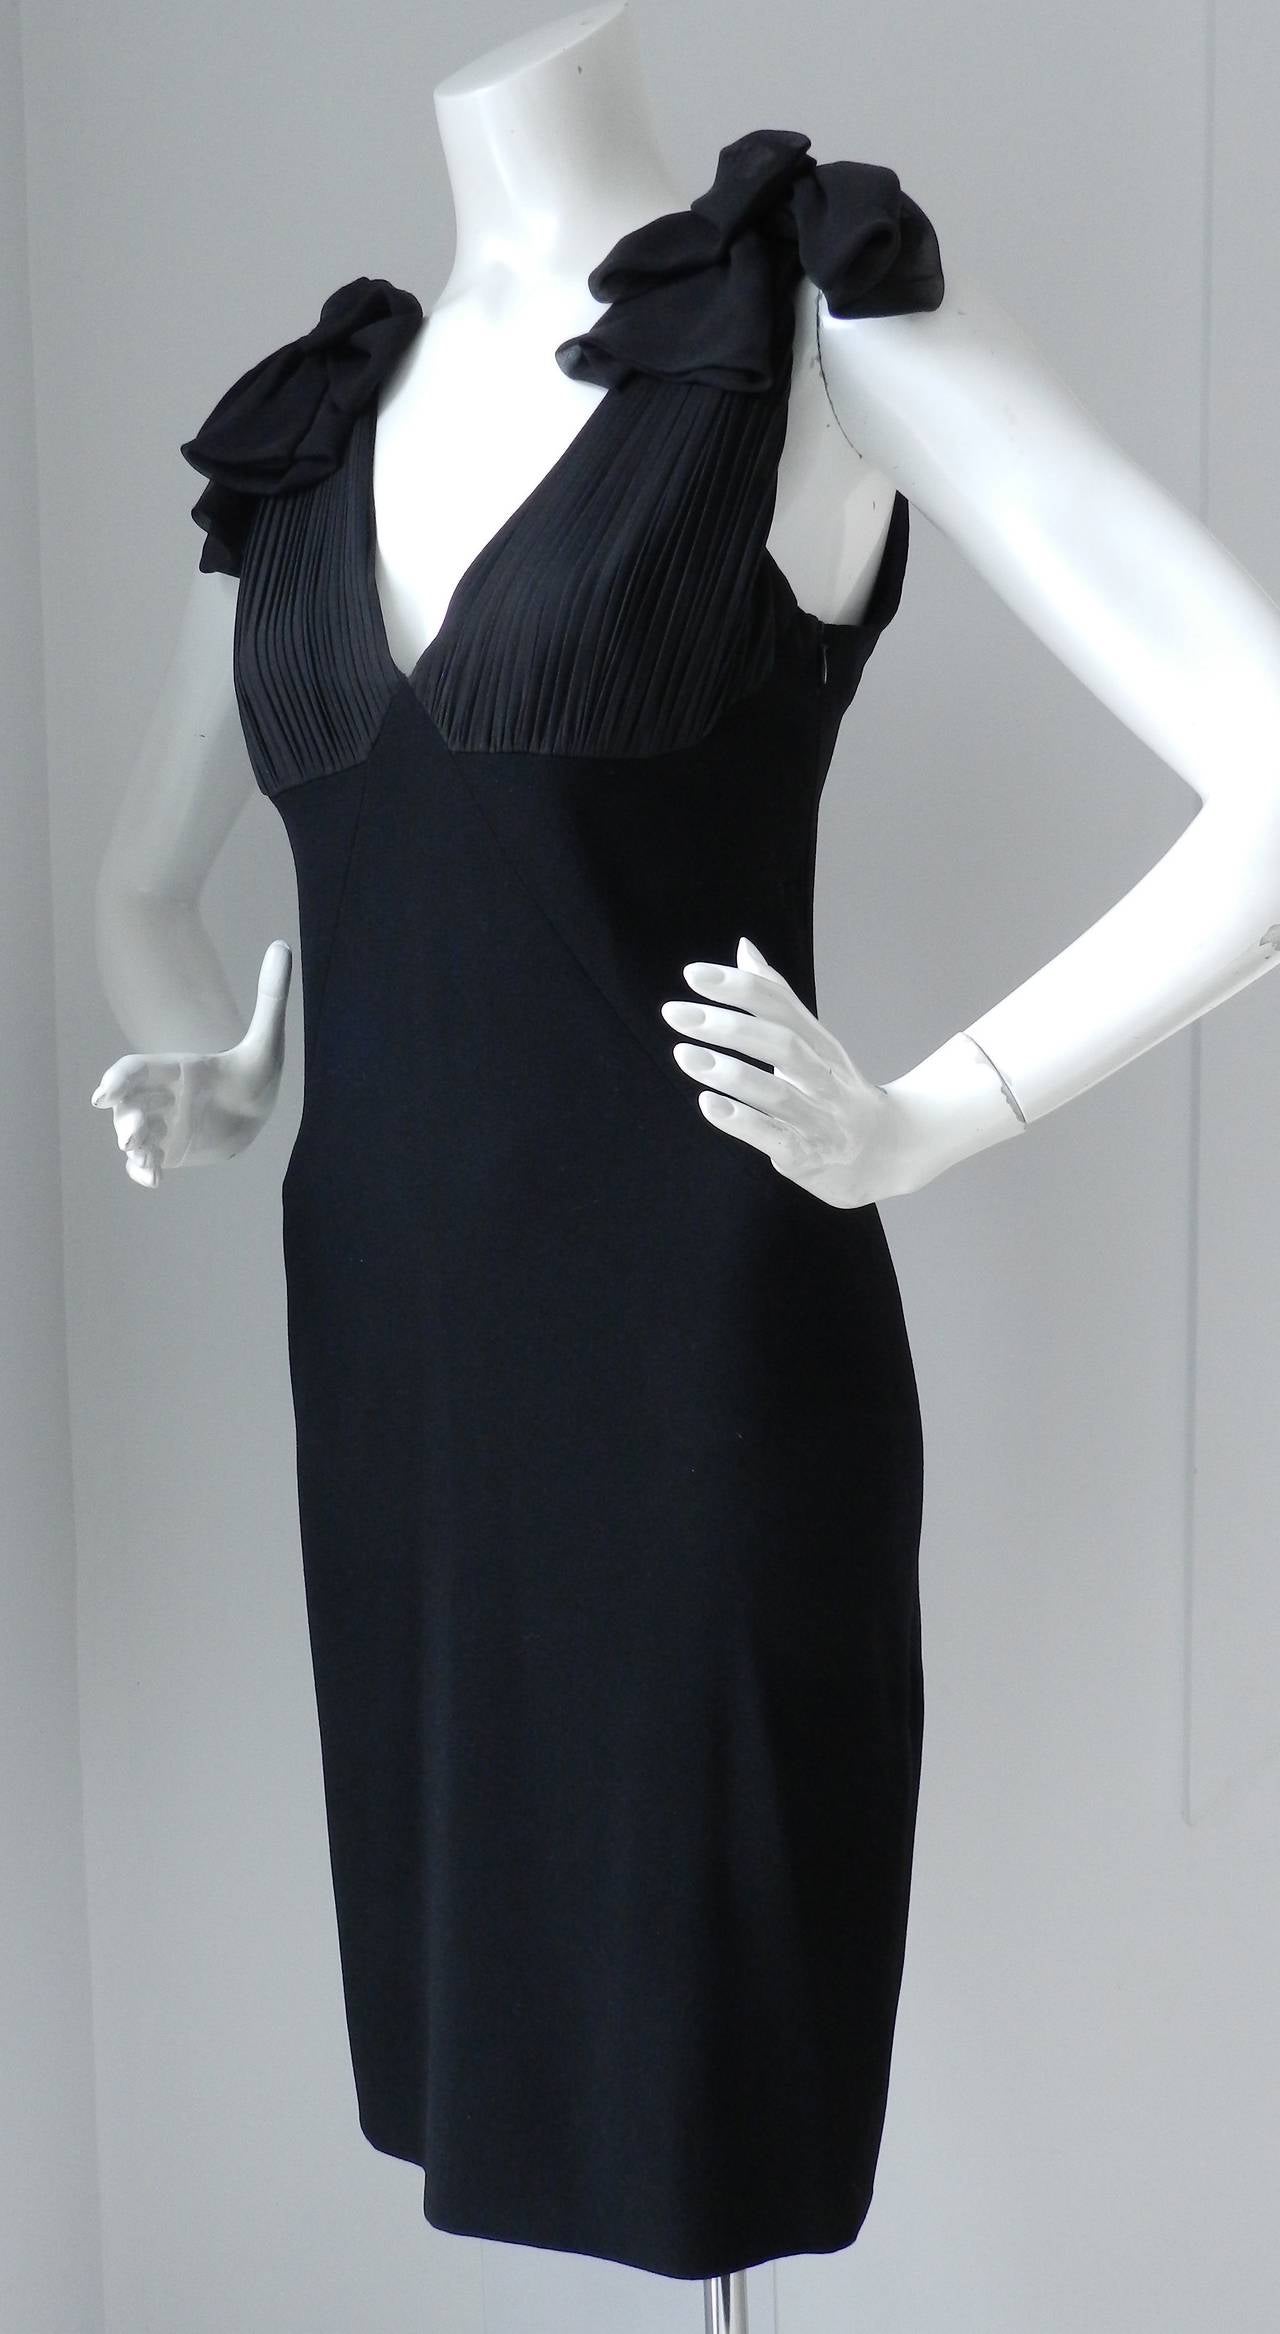 Balenciaga black cocktail dress with pleated sheer bodice and bow detail. Excellent condition - original retail $1995. Tagged size FR 38 (USA 6, but measurements can fit an 8). Bust to fit 34/35